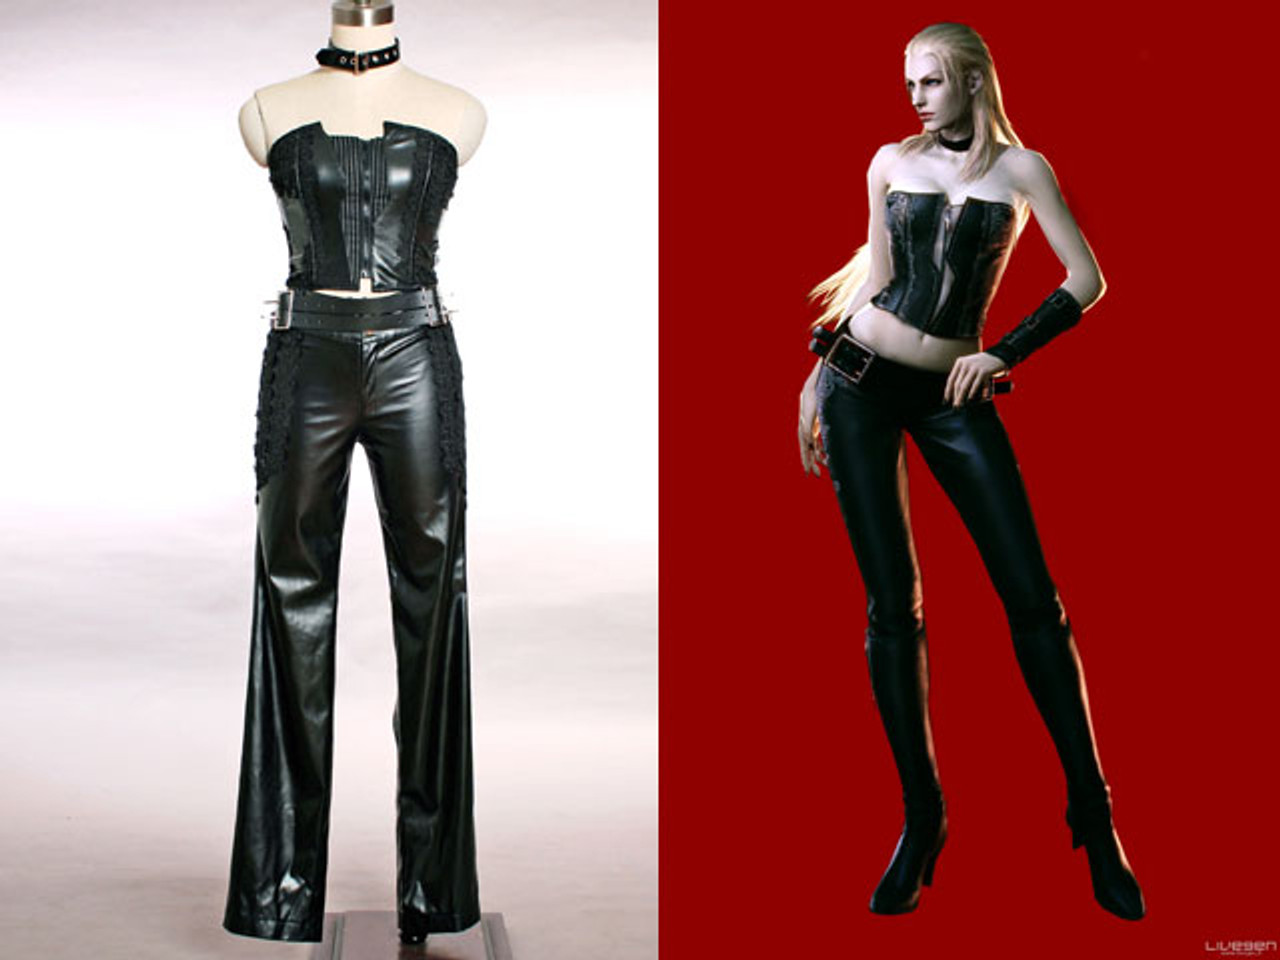 Devil May Cry 4 Special Edition - Lady & Trish Costume Pack